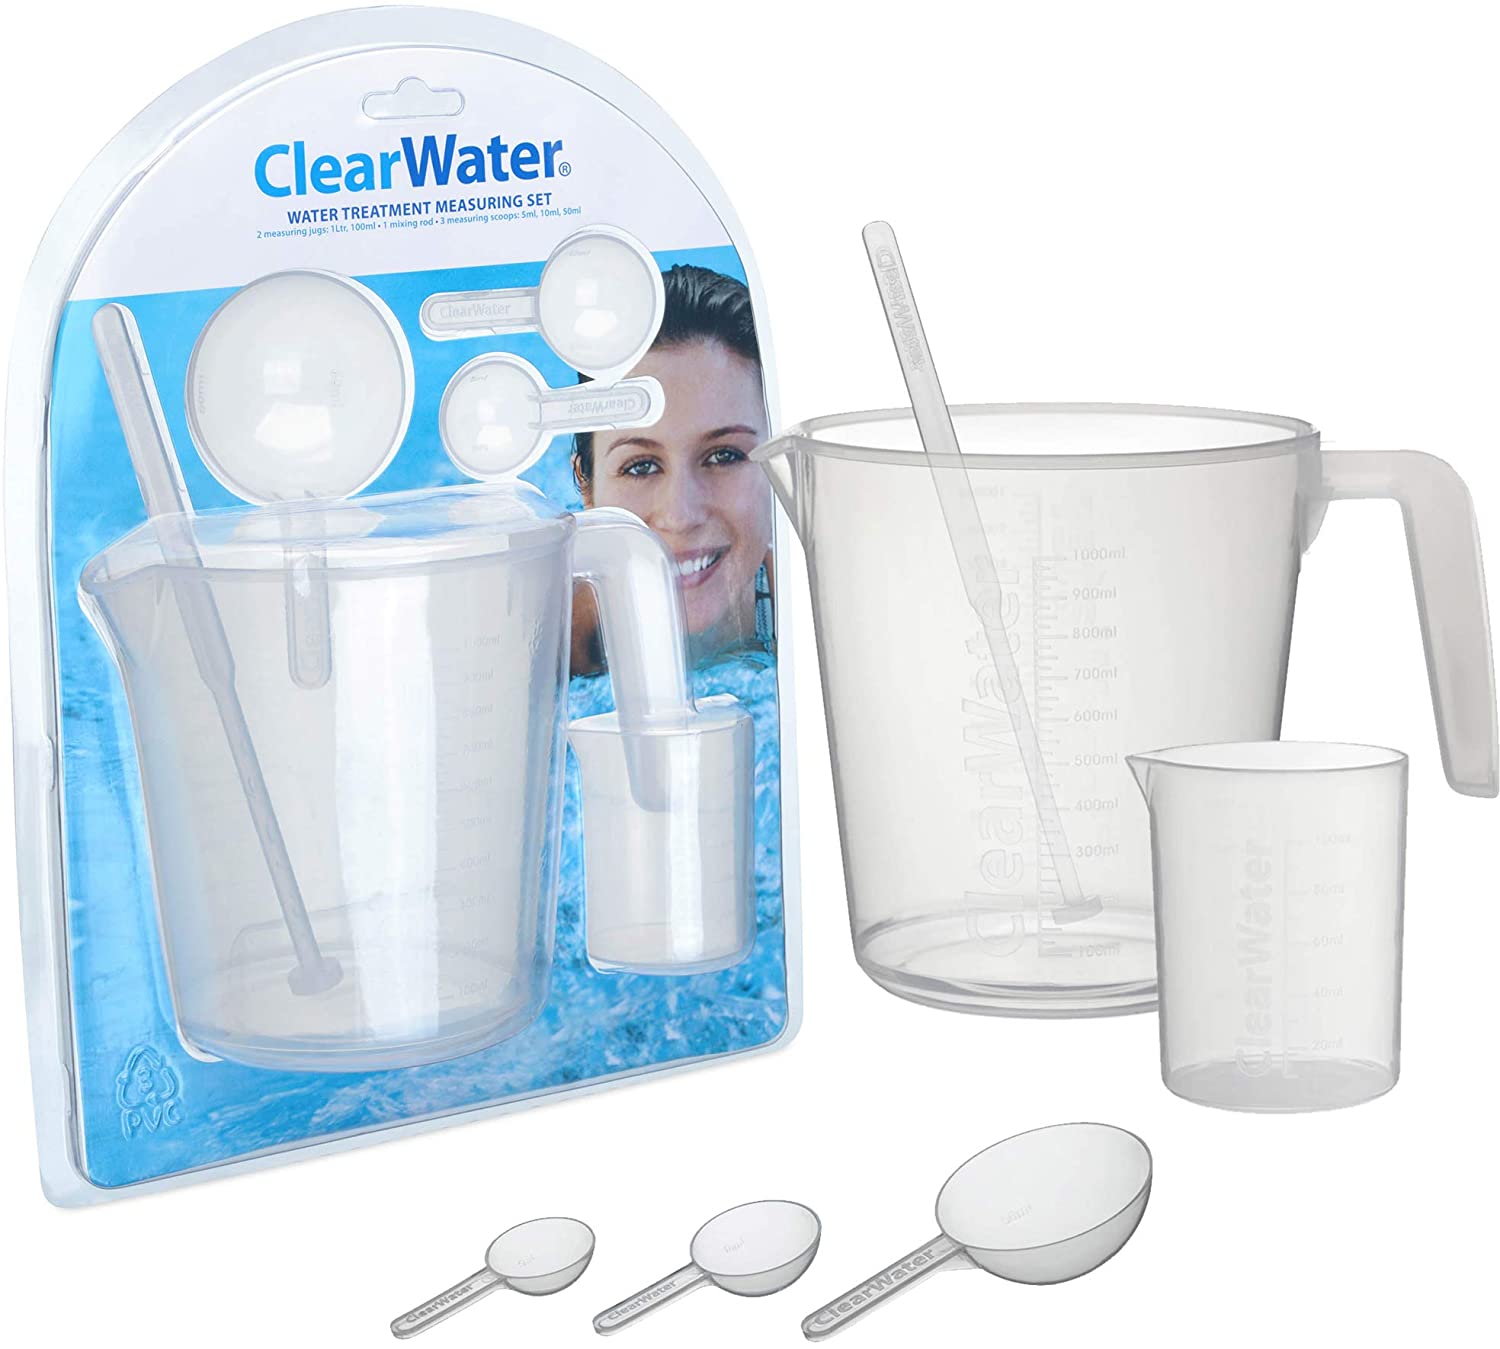 Clearwater Measuring Set for Swimming Pool and Hot Tub Chemical Treatment